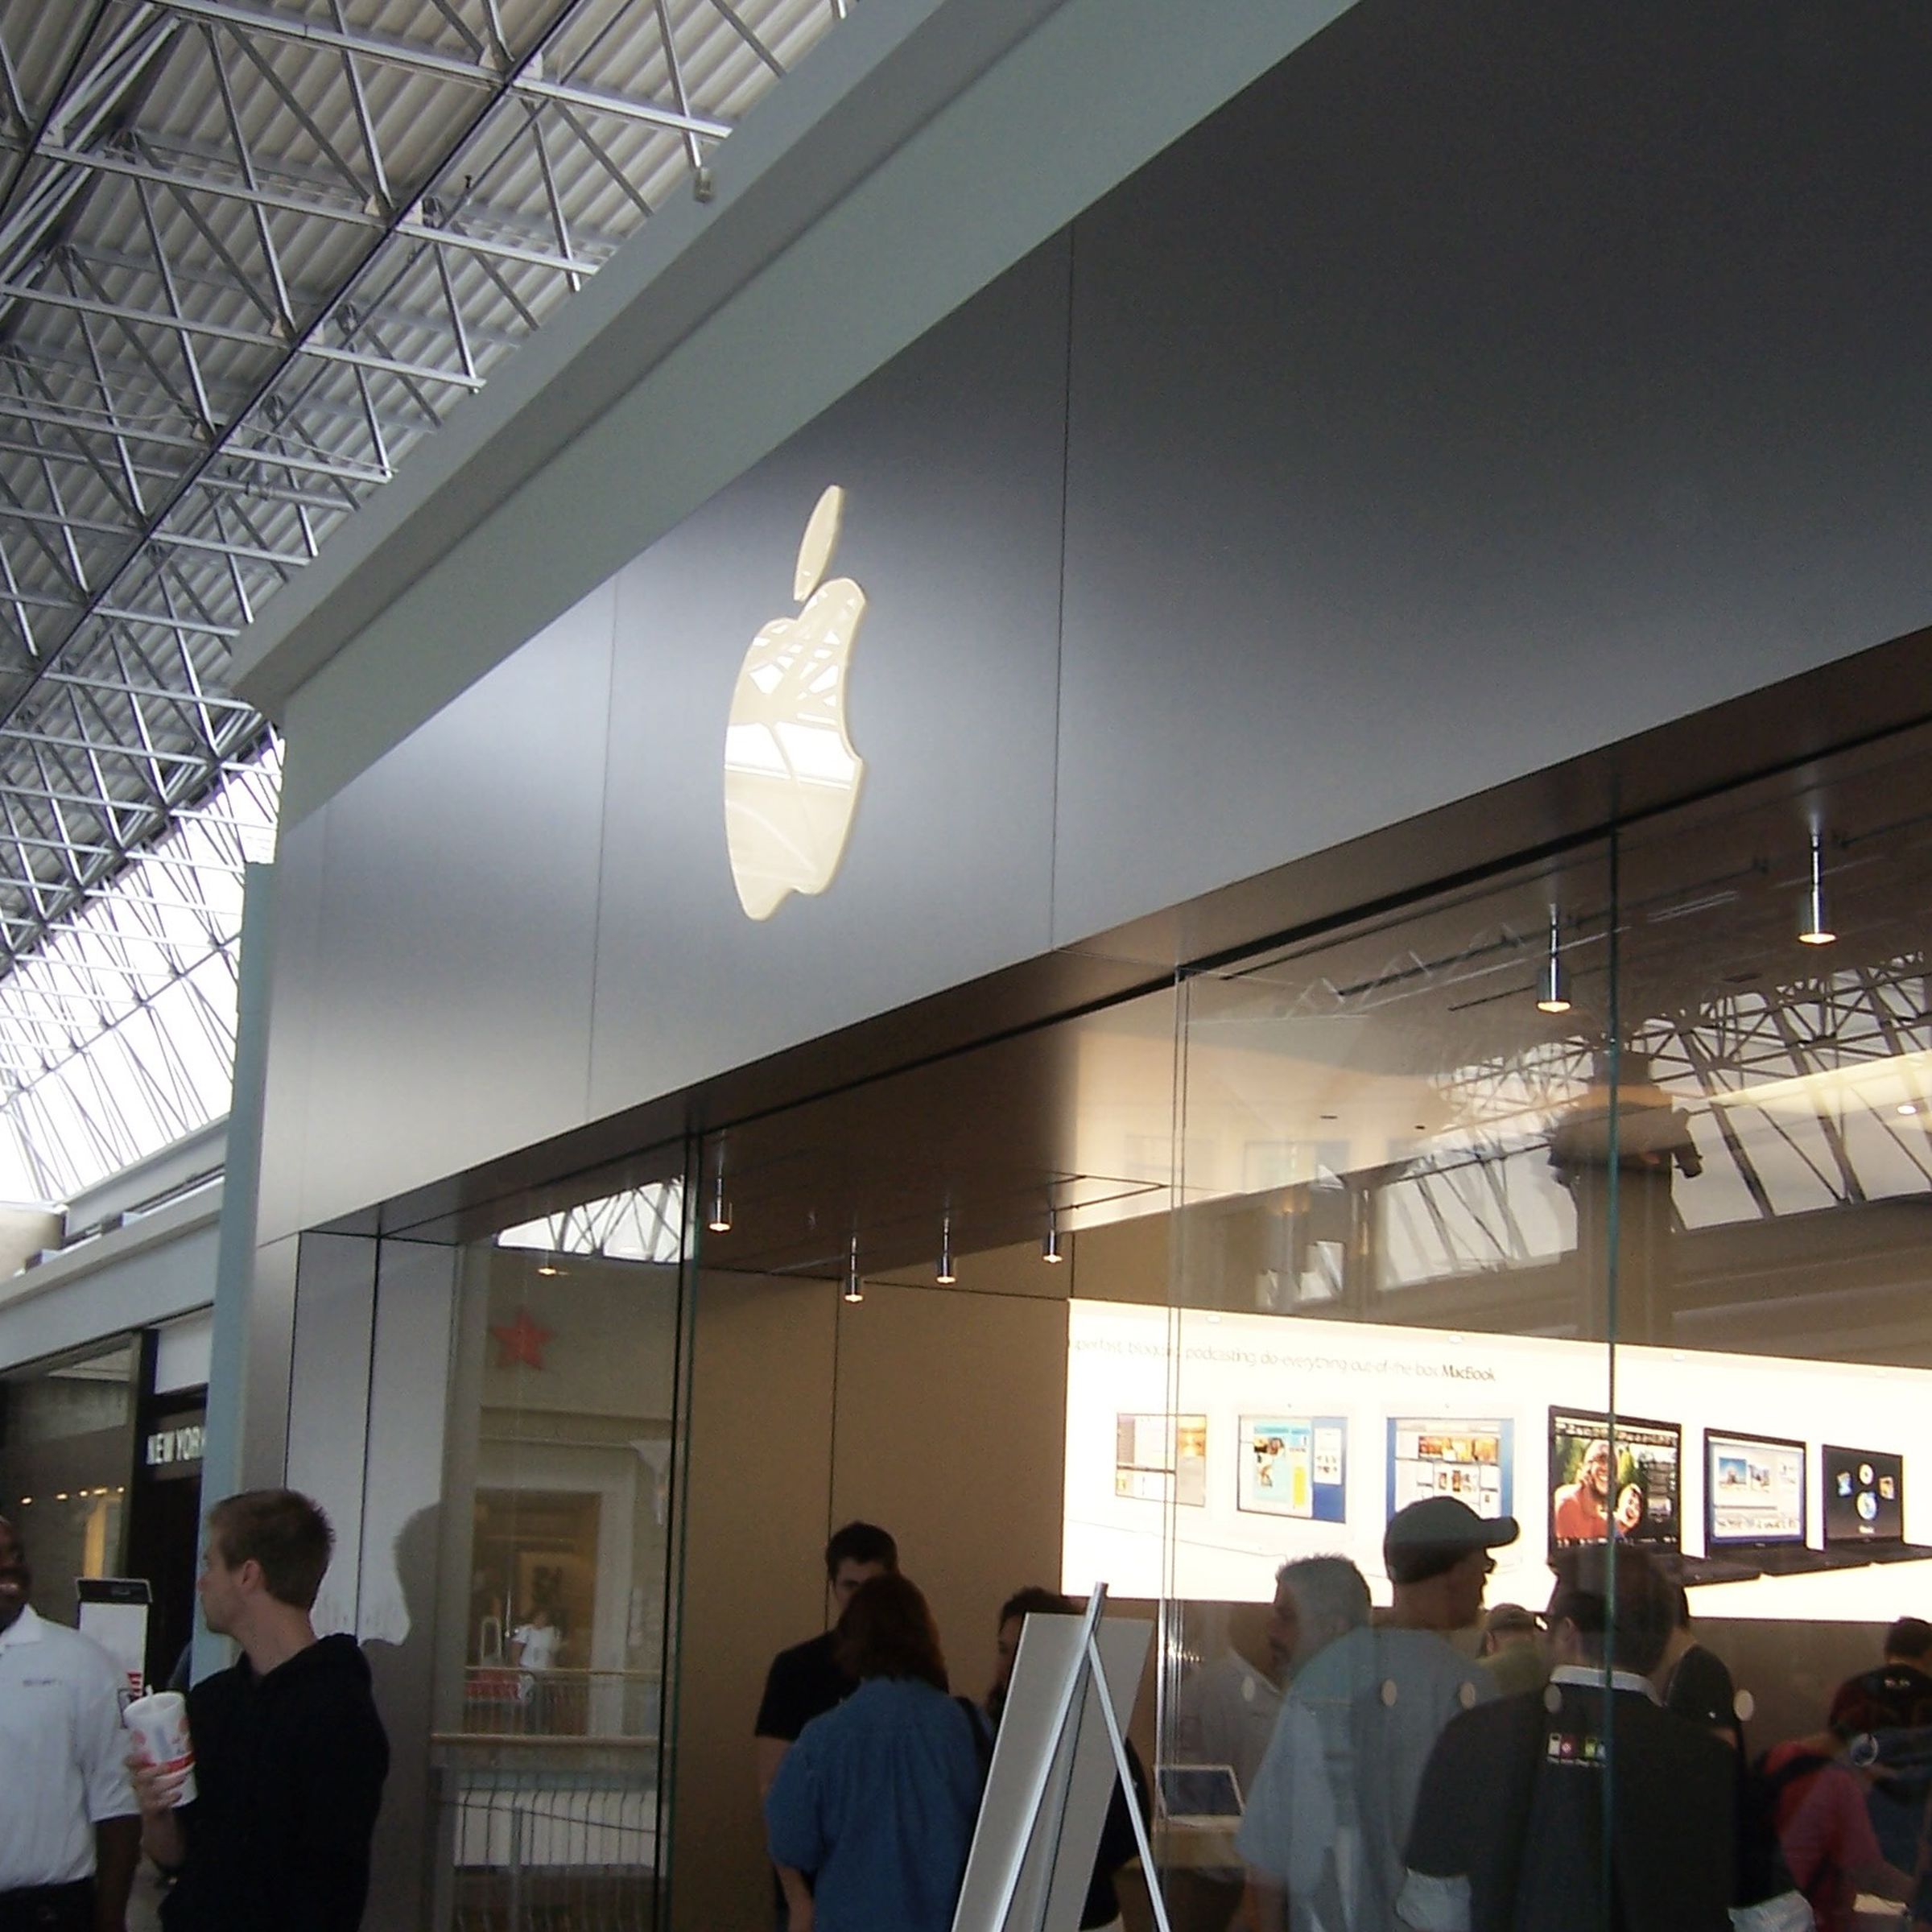 Apple Store front in mall with lit apple logo on top and many people inside